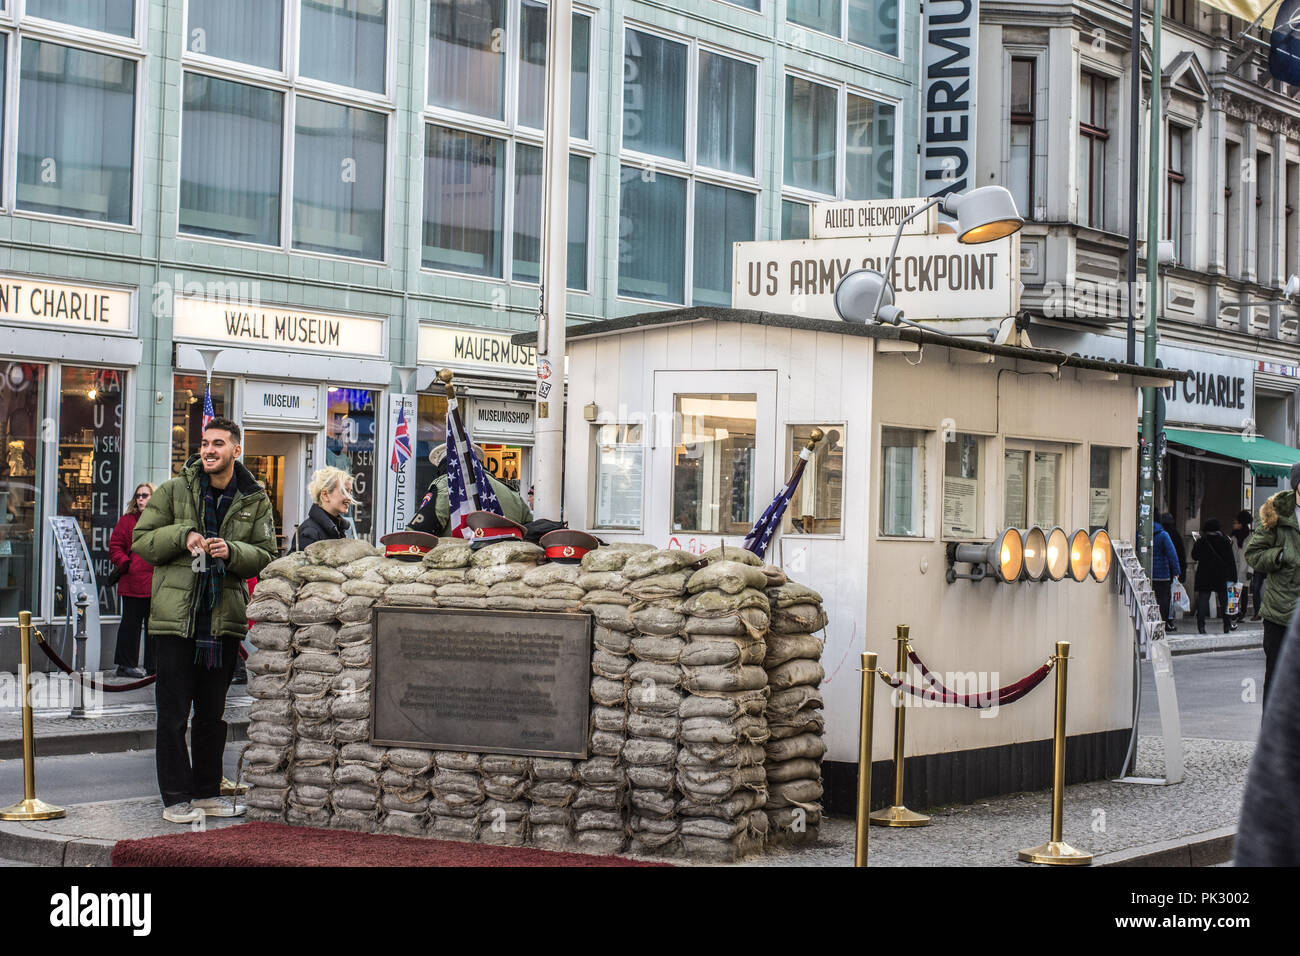 Checkpoint Charlie Berlin, US Army Checkpoint, Berliner Mauer Stockfoto